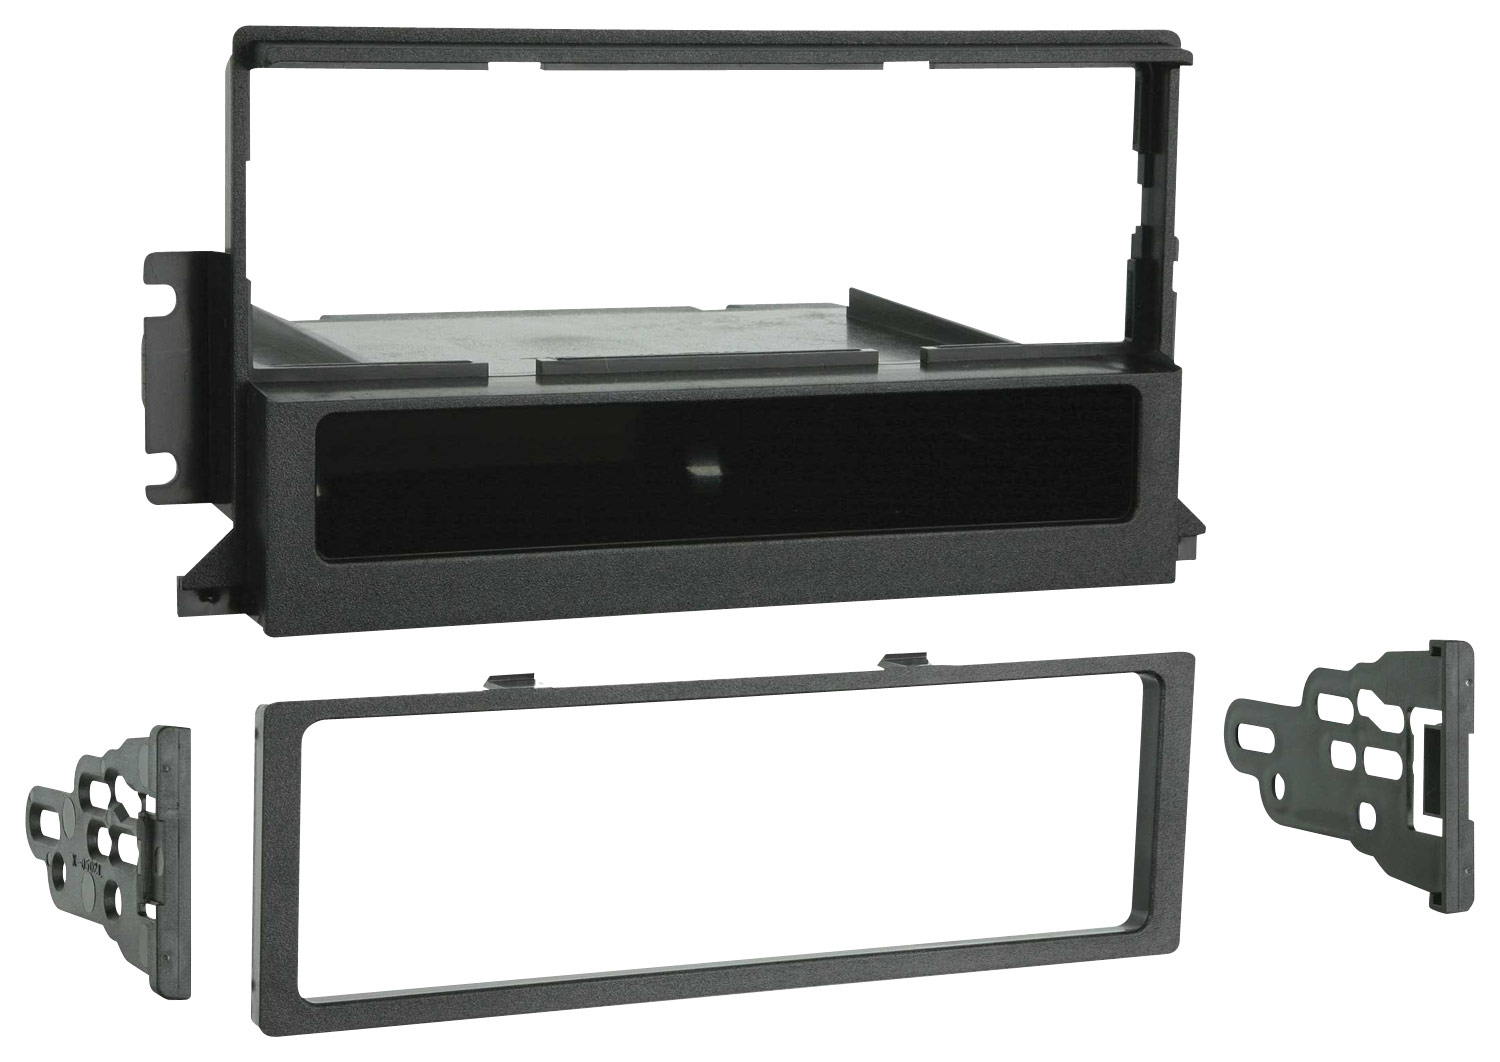 Metra - Dash Kit for Select 1998-2002 Lincoln Continental - Black was $16.99 now $12.74 (25.0% off)